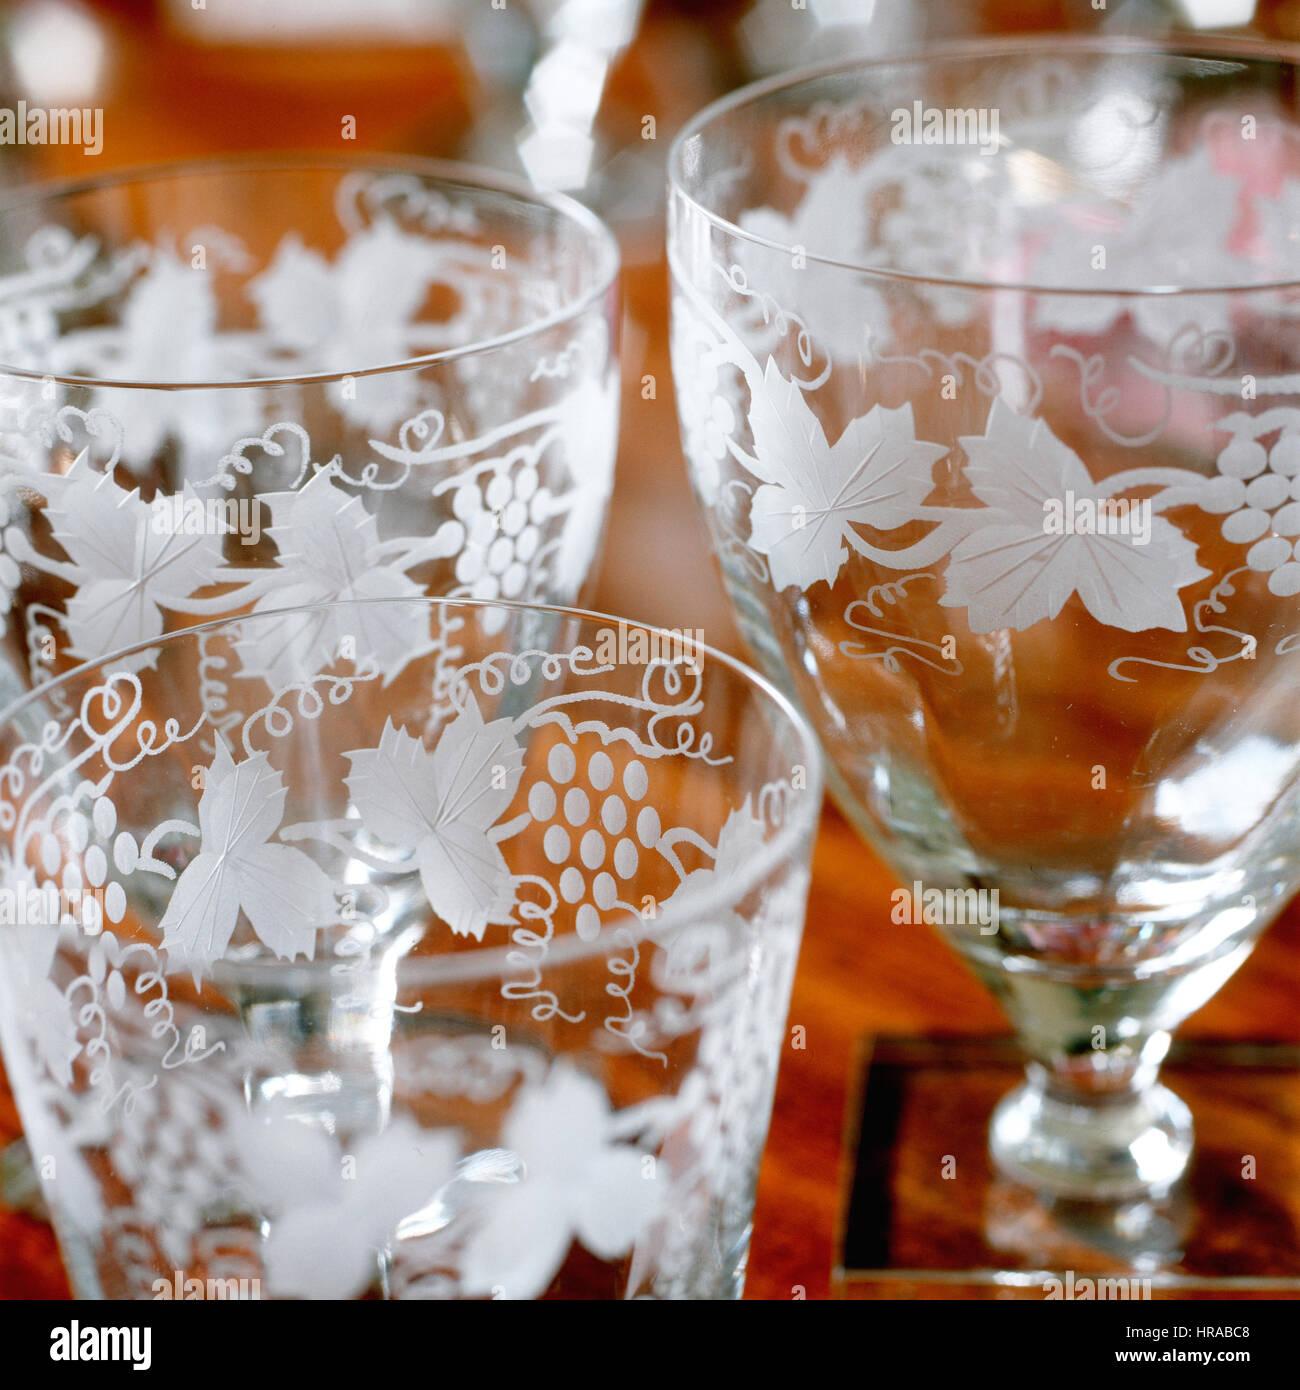 Wine glasses with a vine pattern. Stock Photo